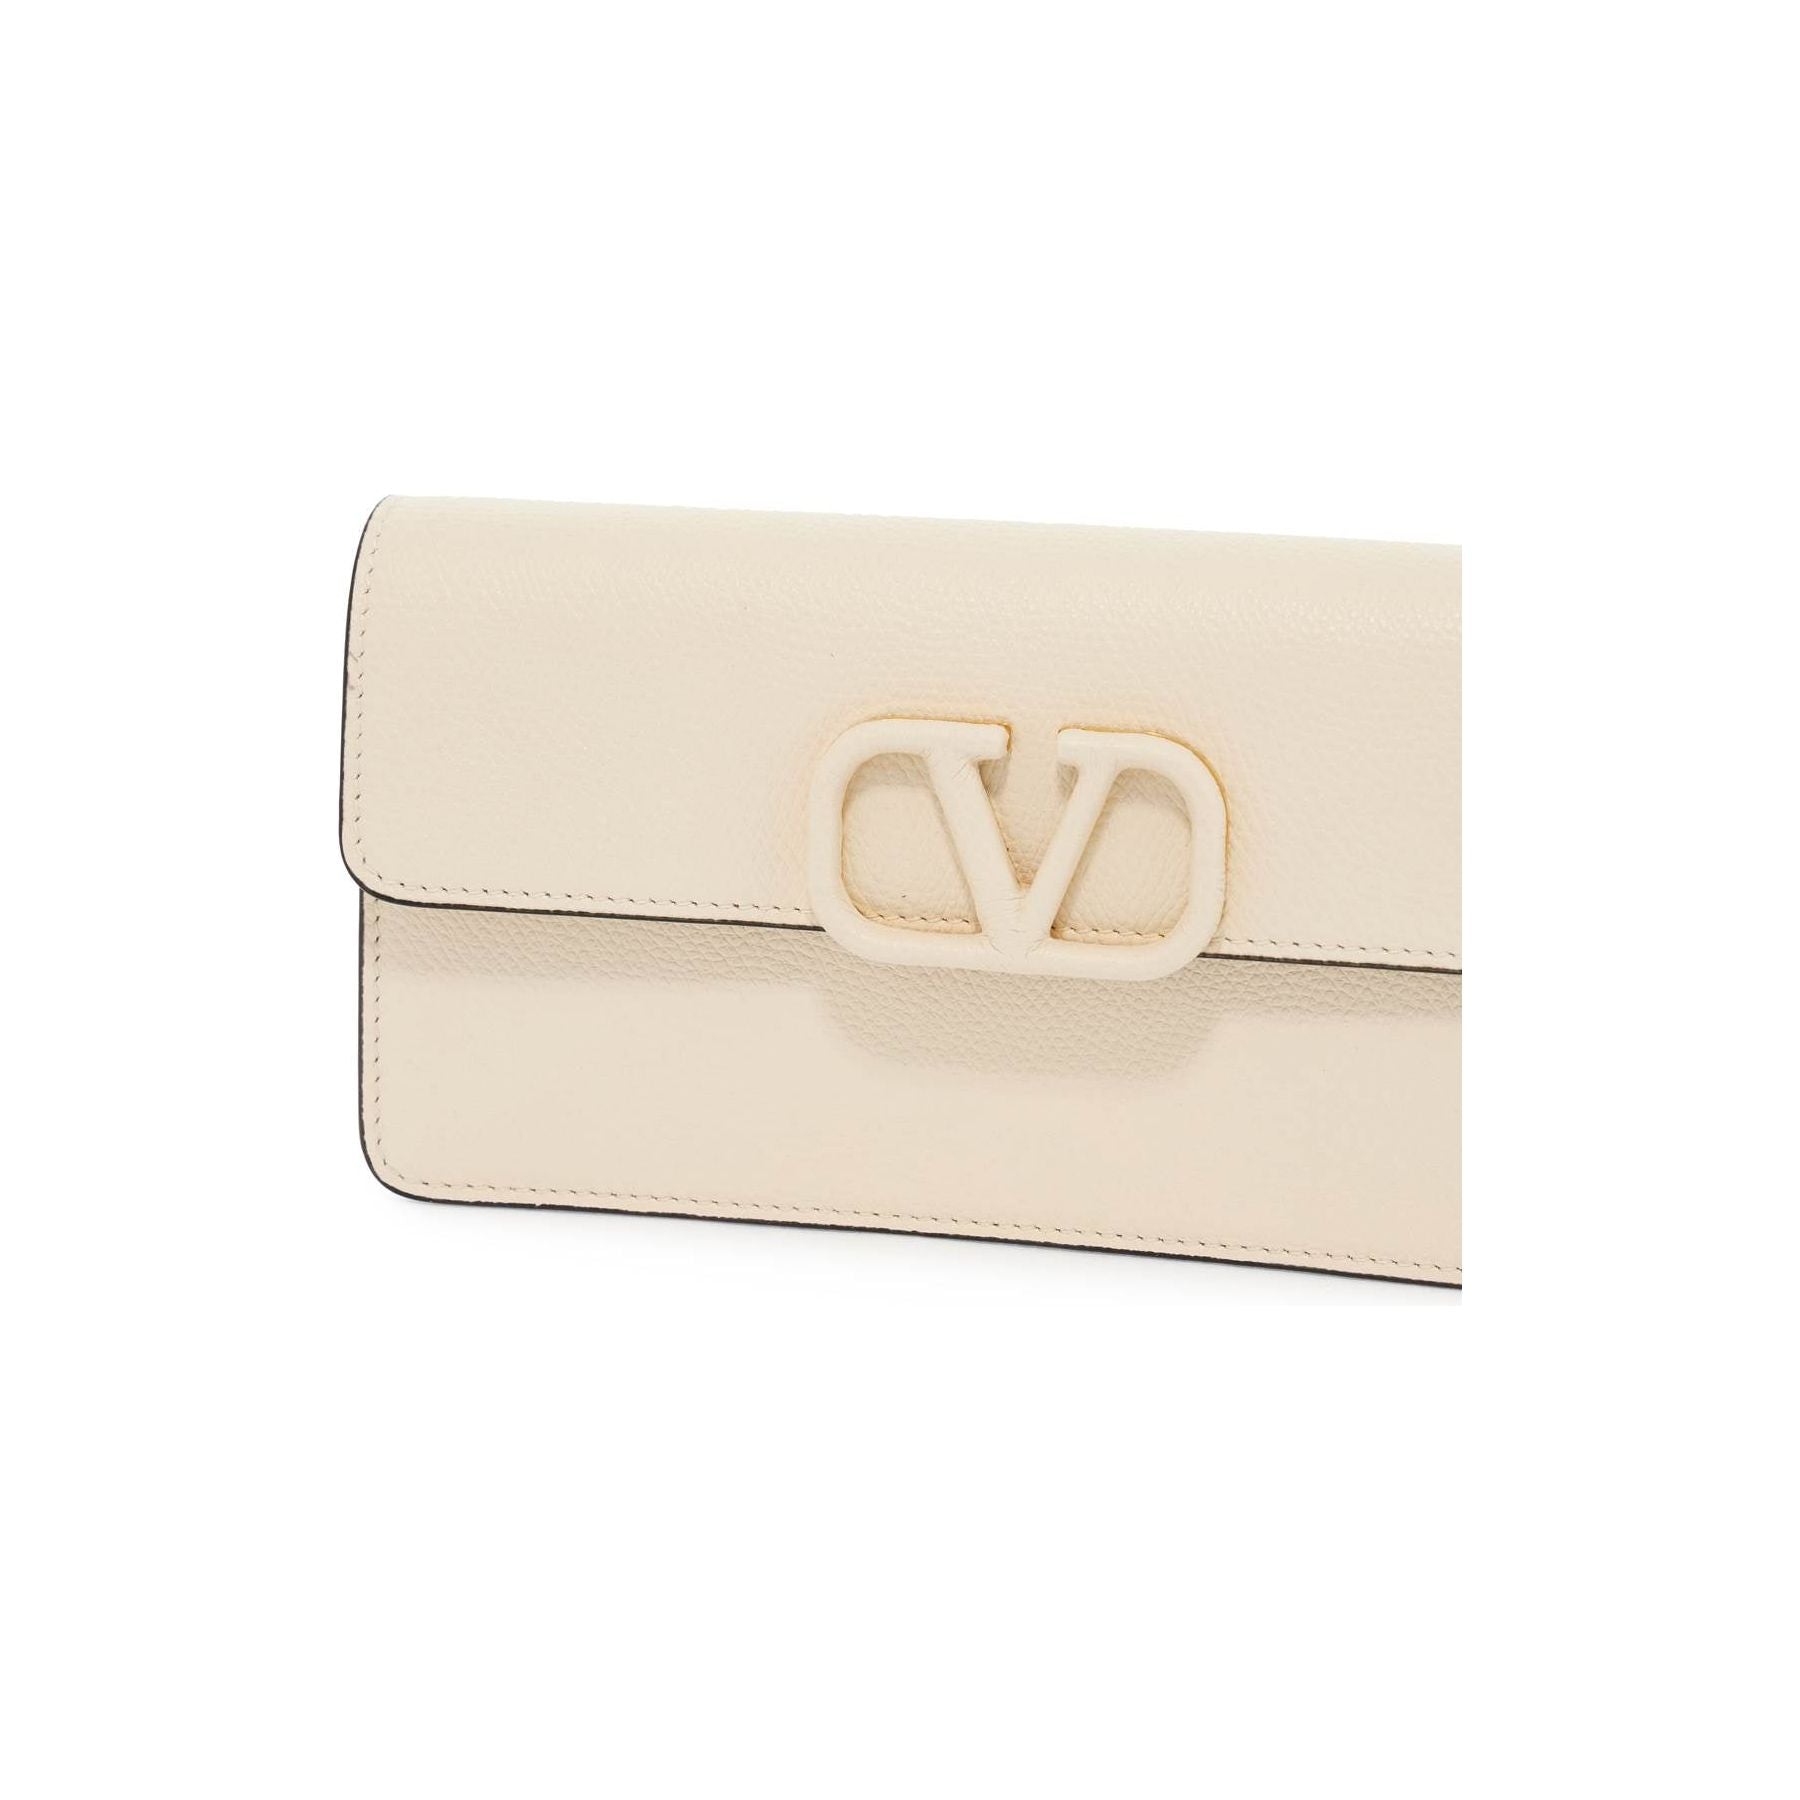 Vlogo Signature Grainy Calfskin Wallet with Chain